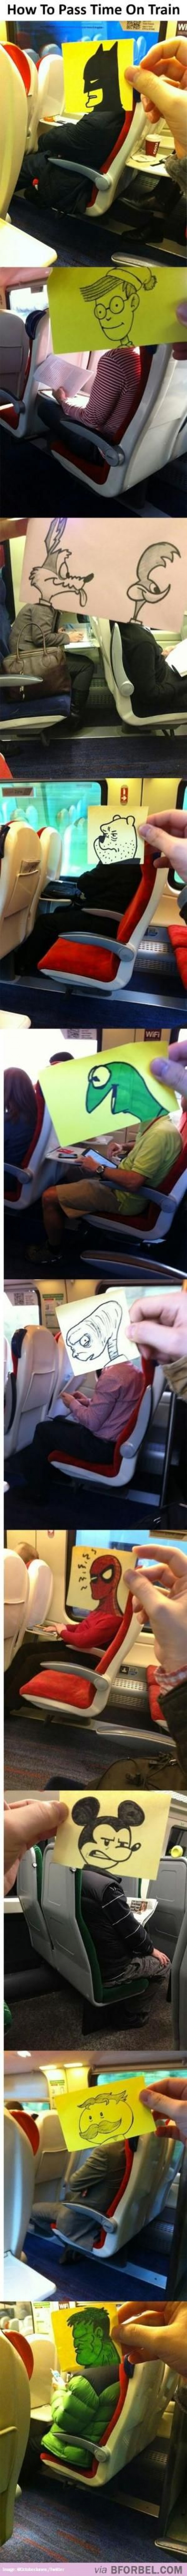 How To Pass The Time On The Train